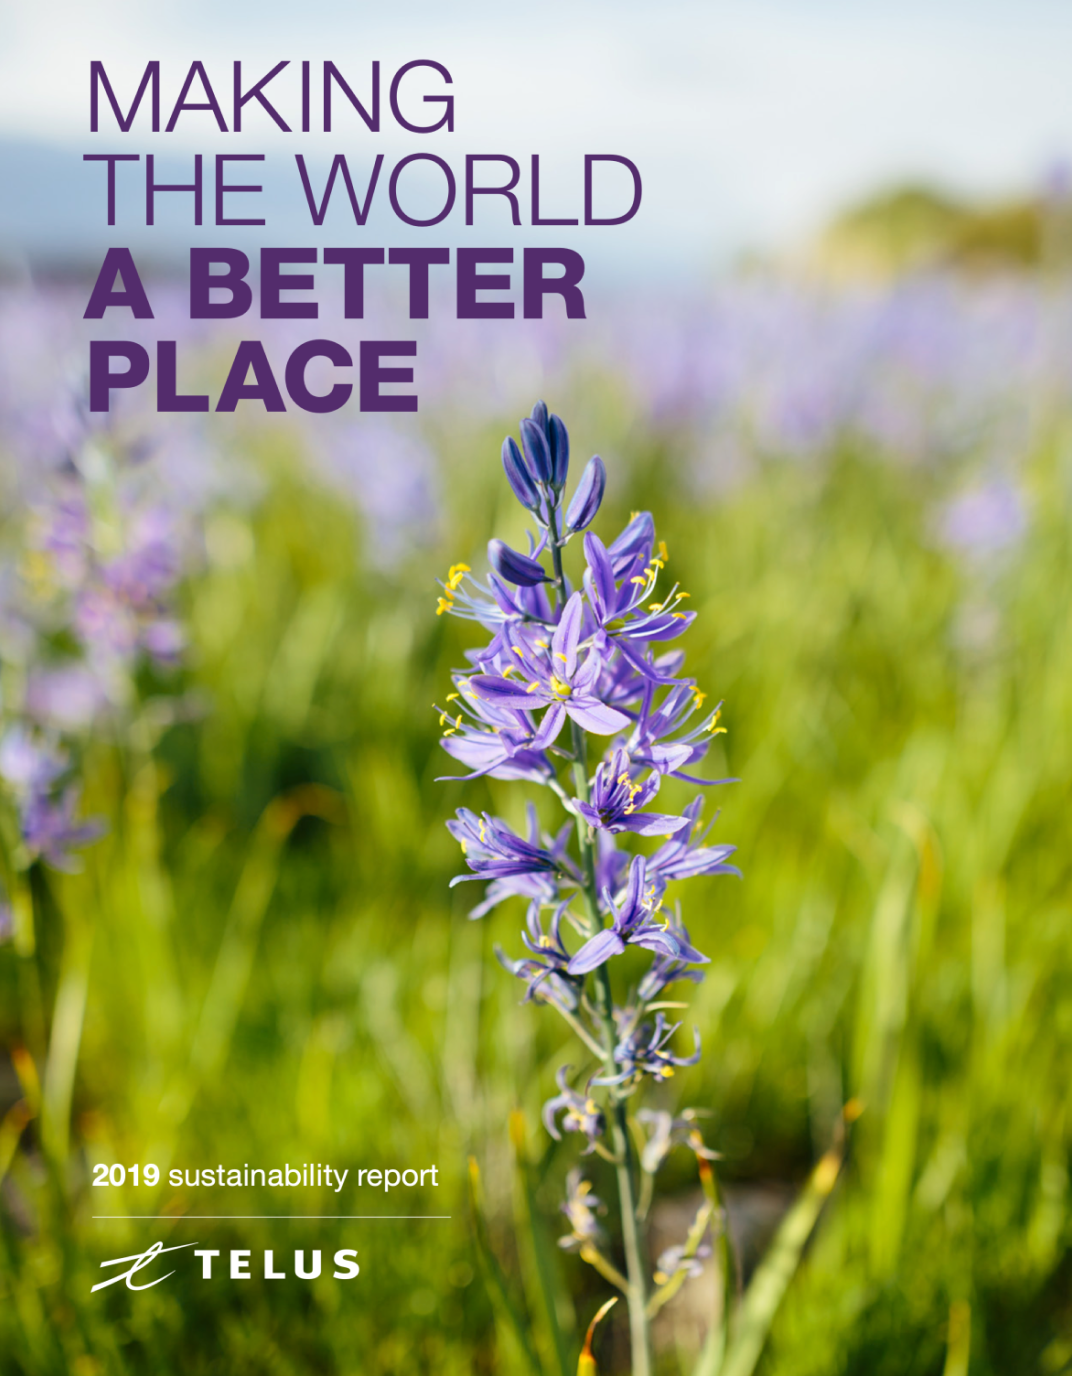 The cover of the 2019 TELUS Sustainability Report 